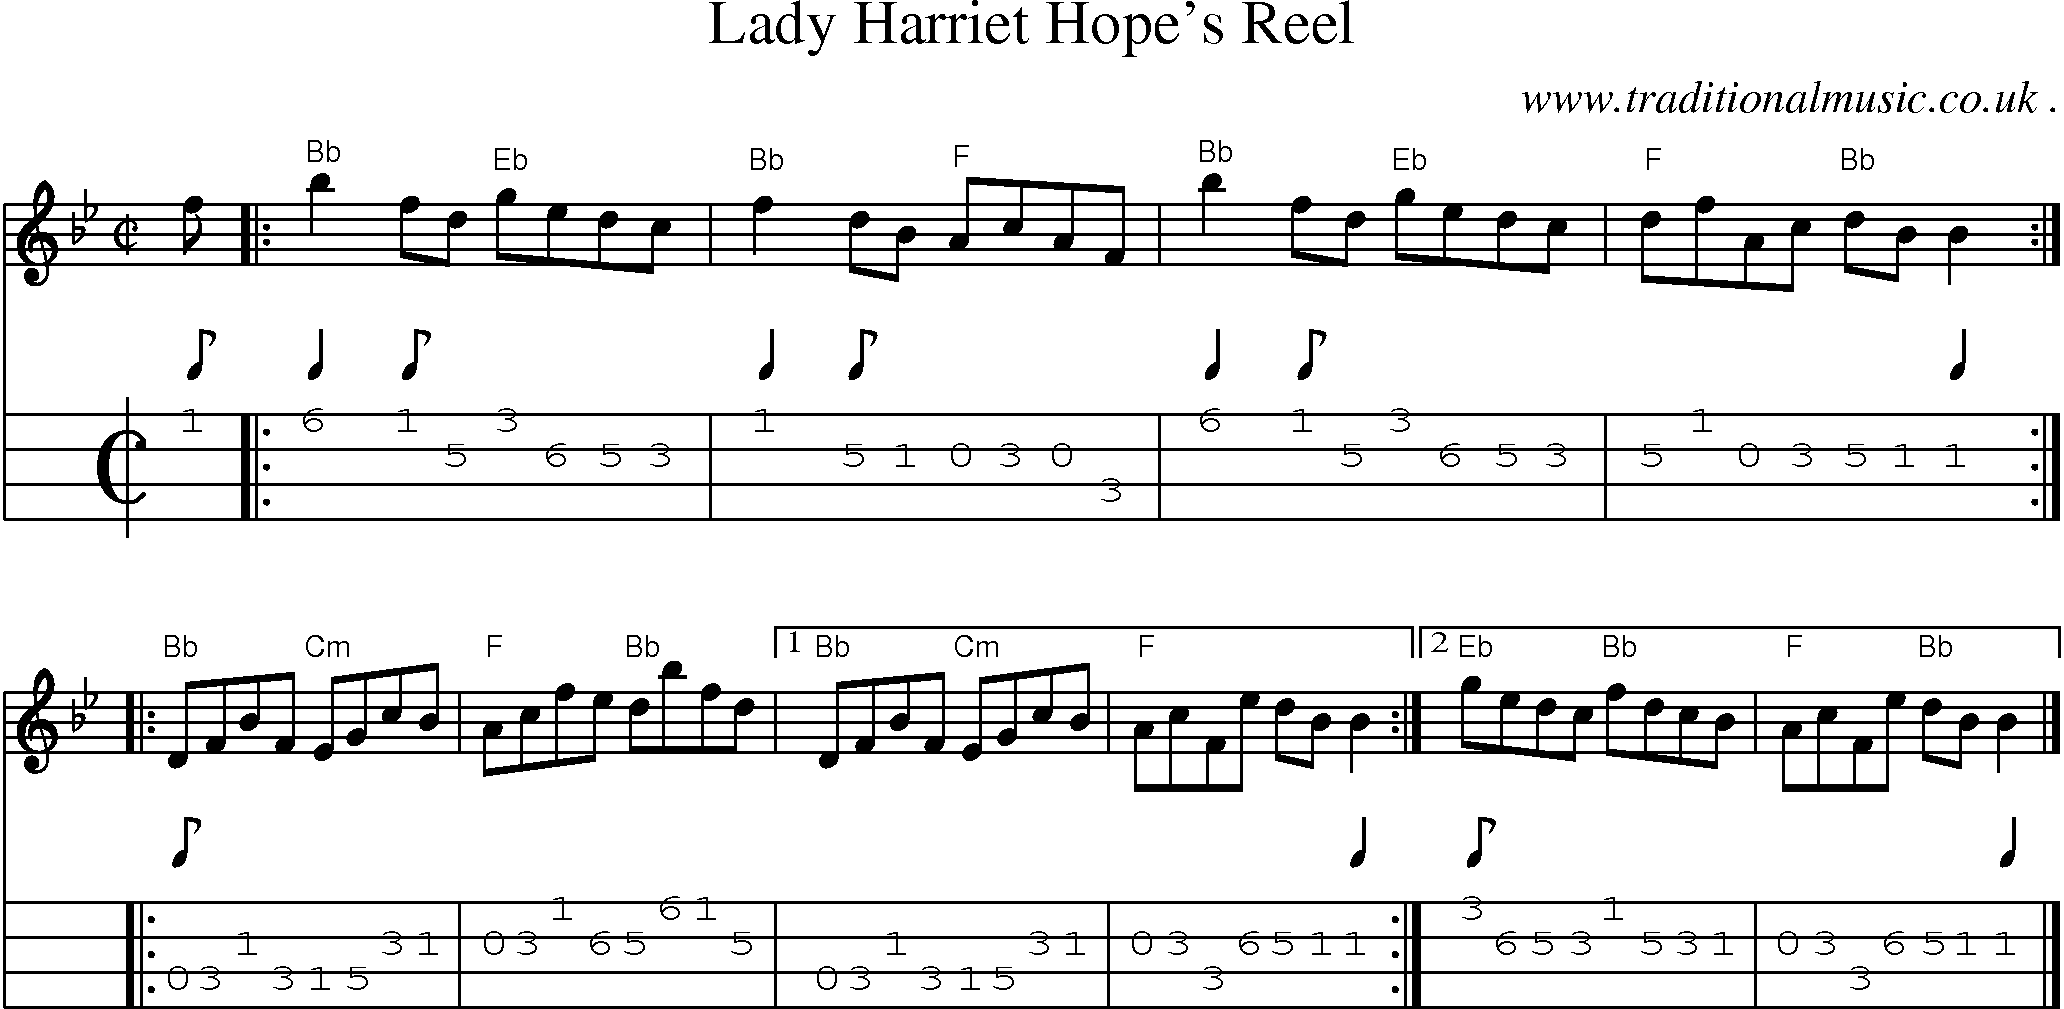 Sheet-music  score, Chords and Mandolin Tabs for Lady Harriet Hopes Reel